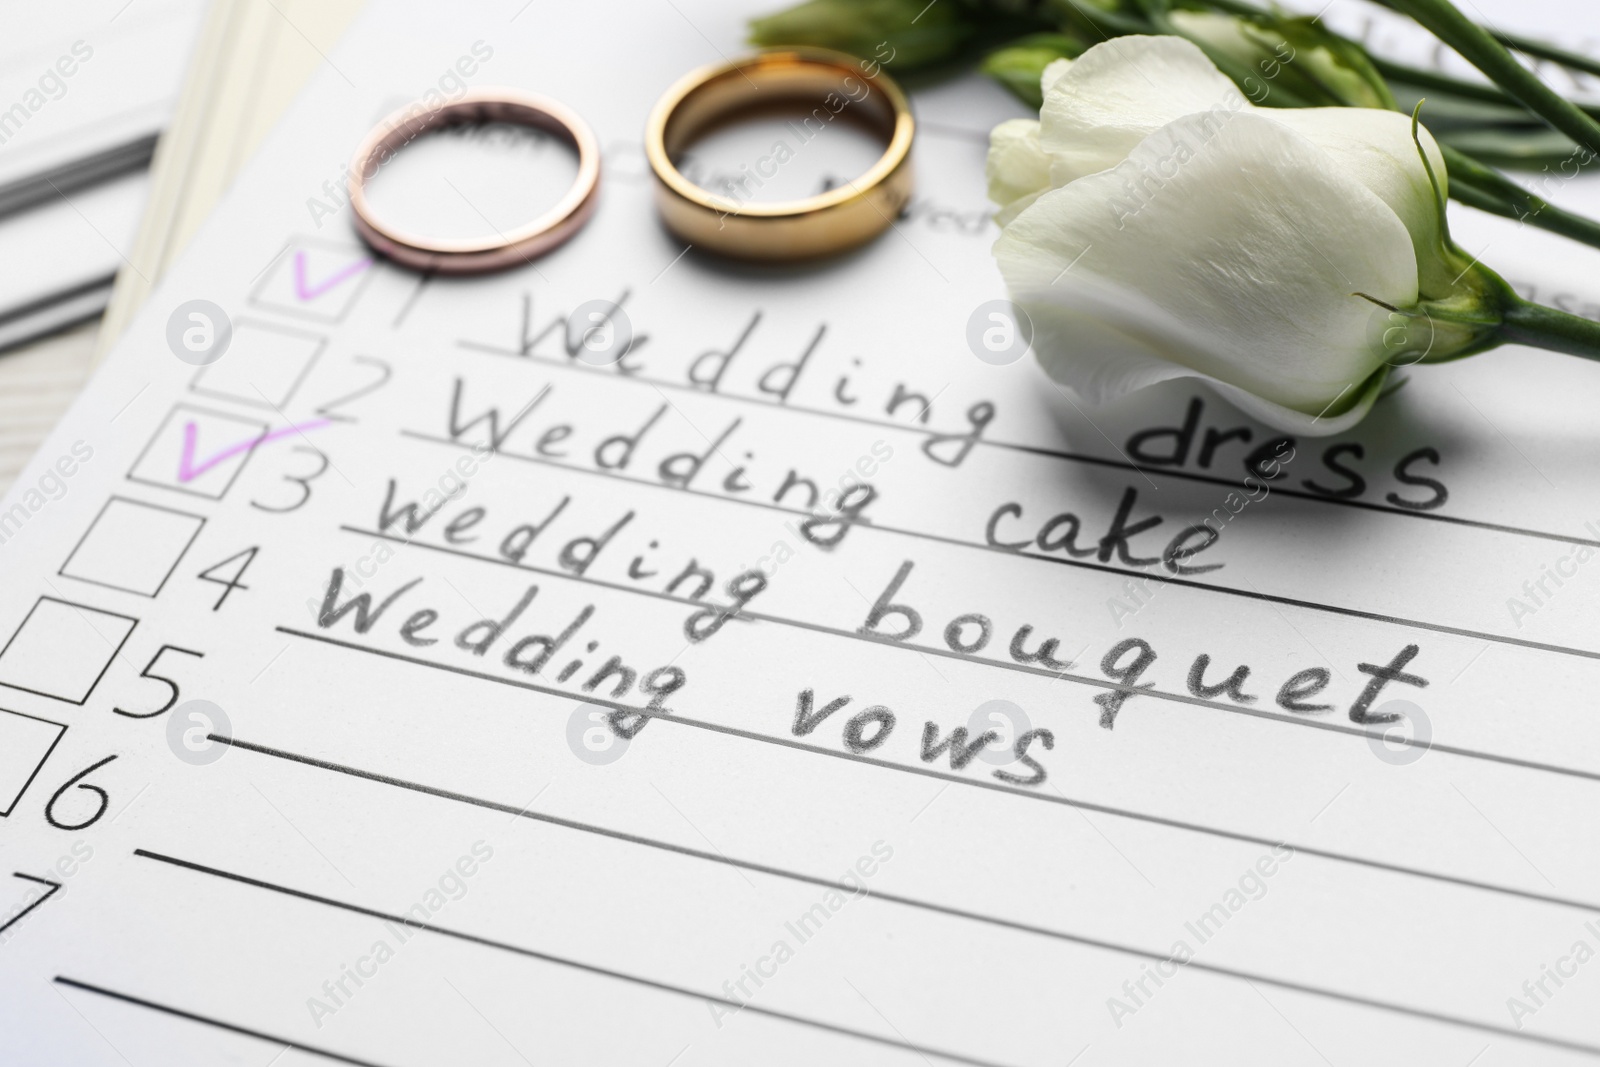 Photo of Wedding Checklist, flowers and rings, closeup view